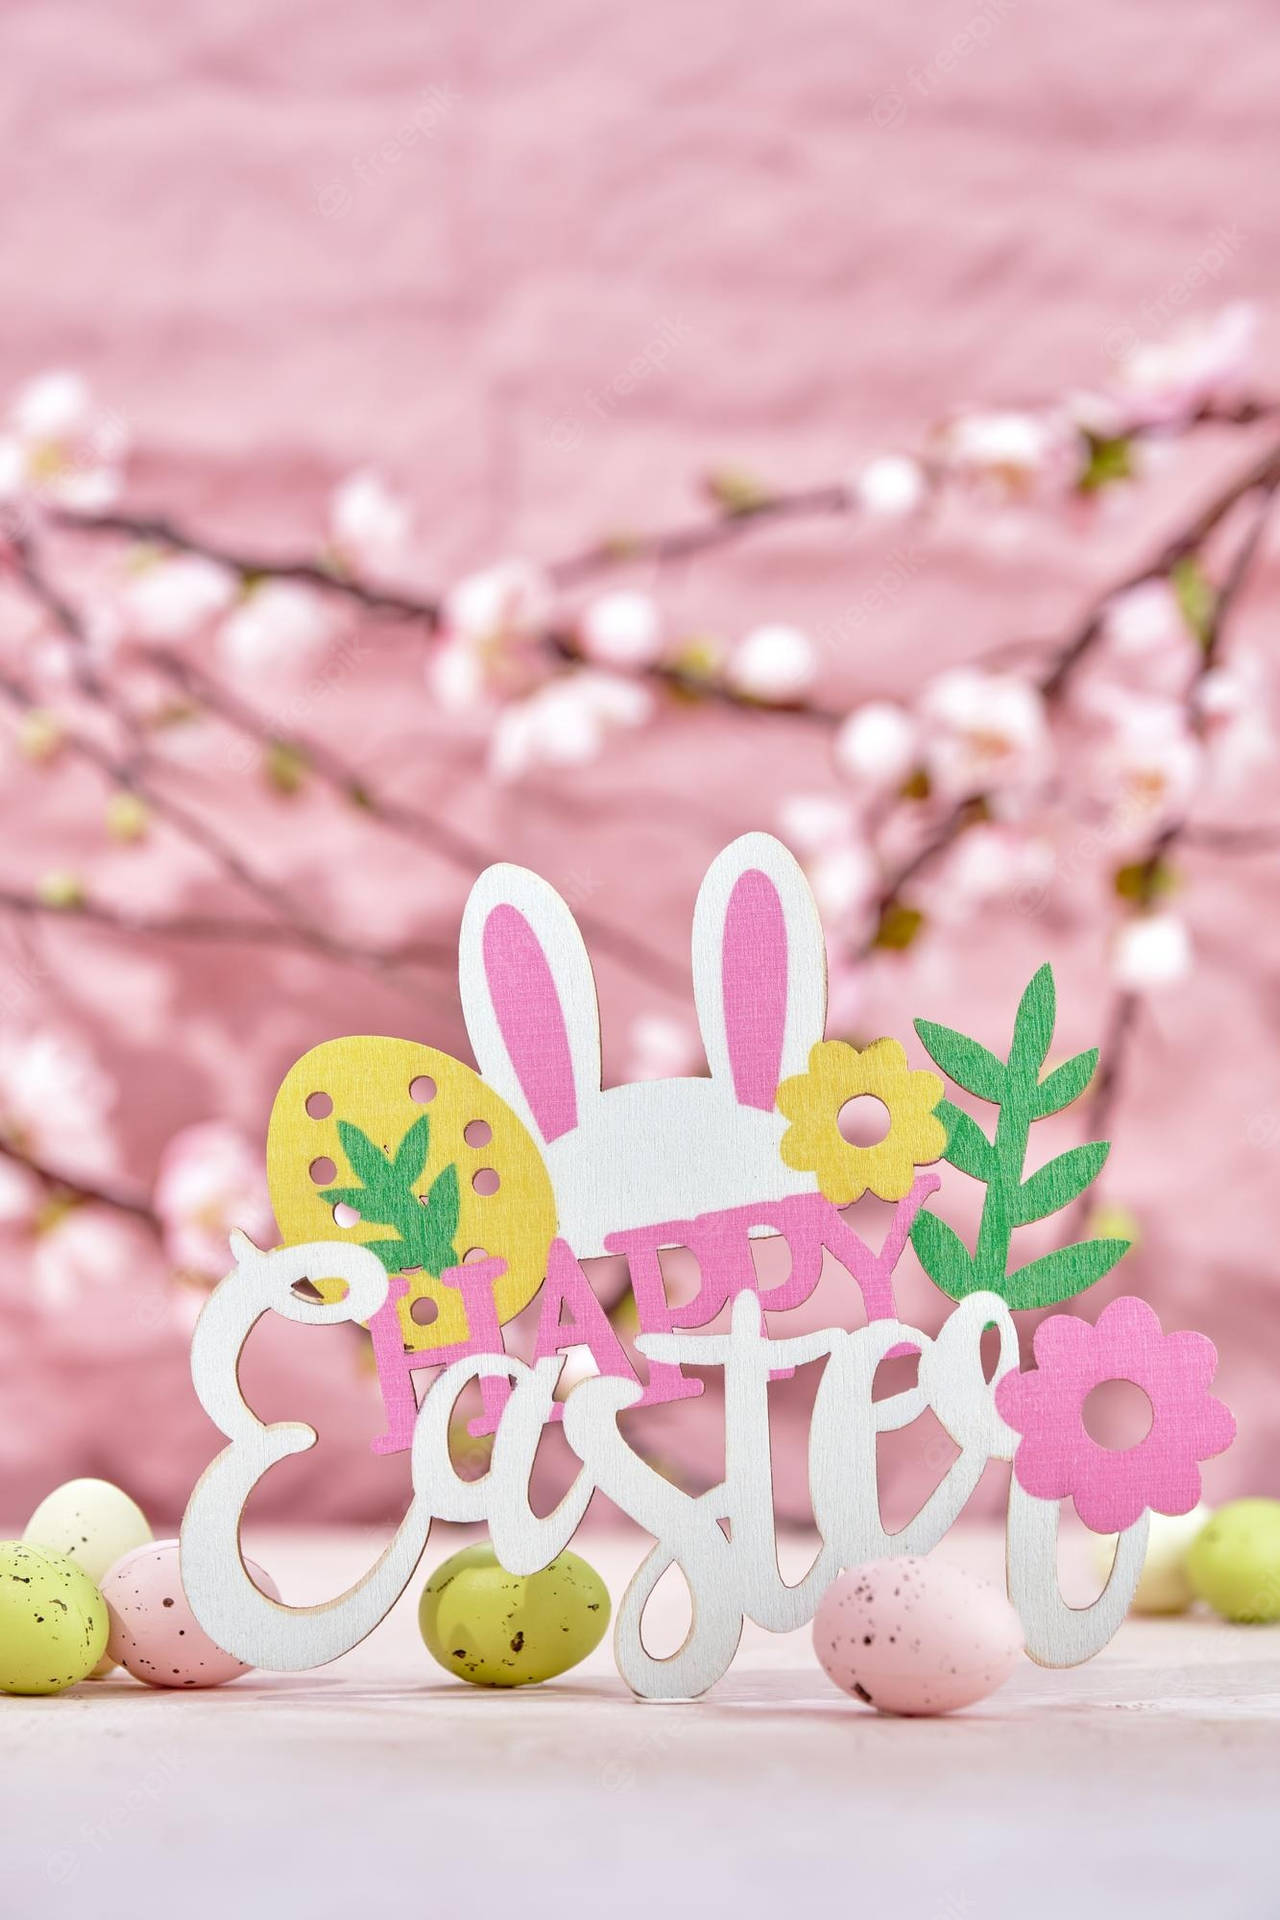 Free Easter iPhone Wallpaper Downloads, Easter iPhone Wallpaper for FREE